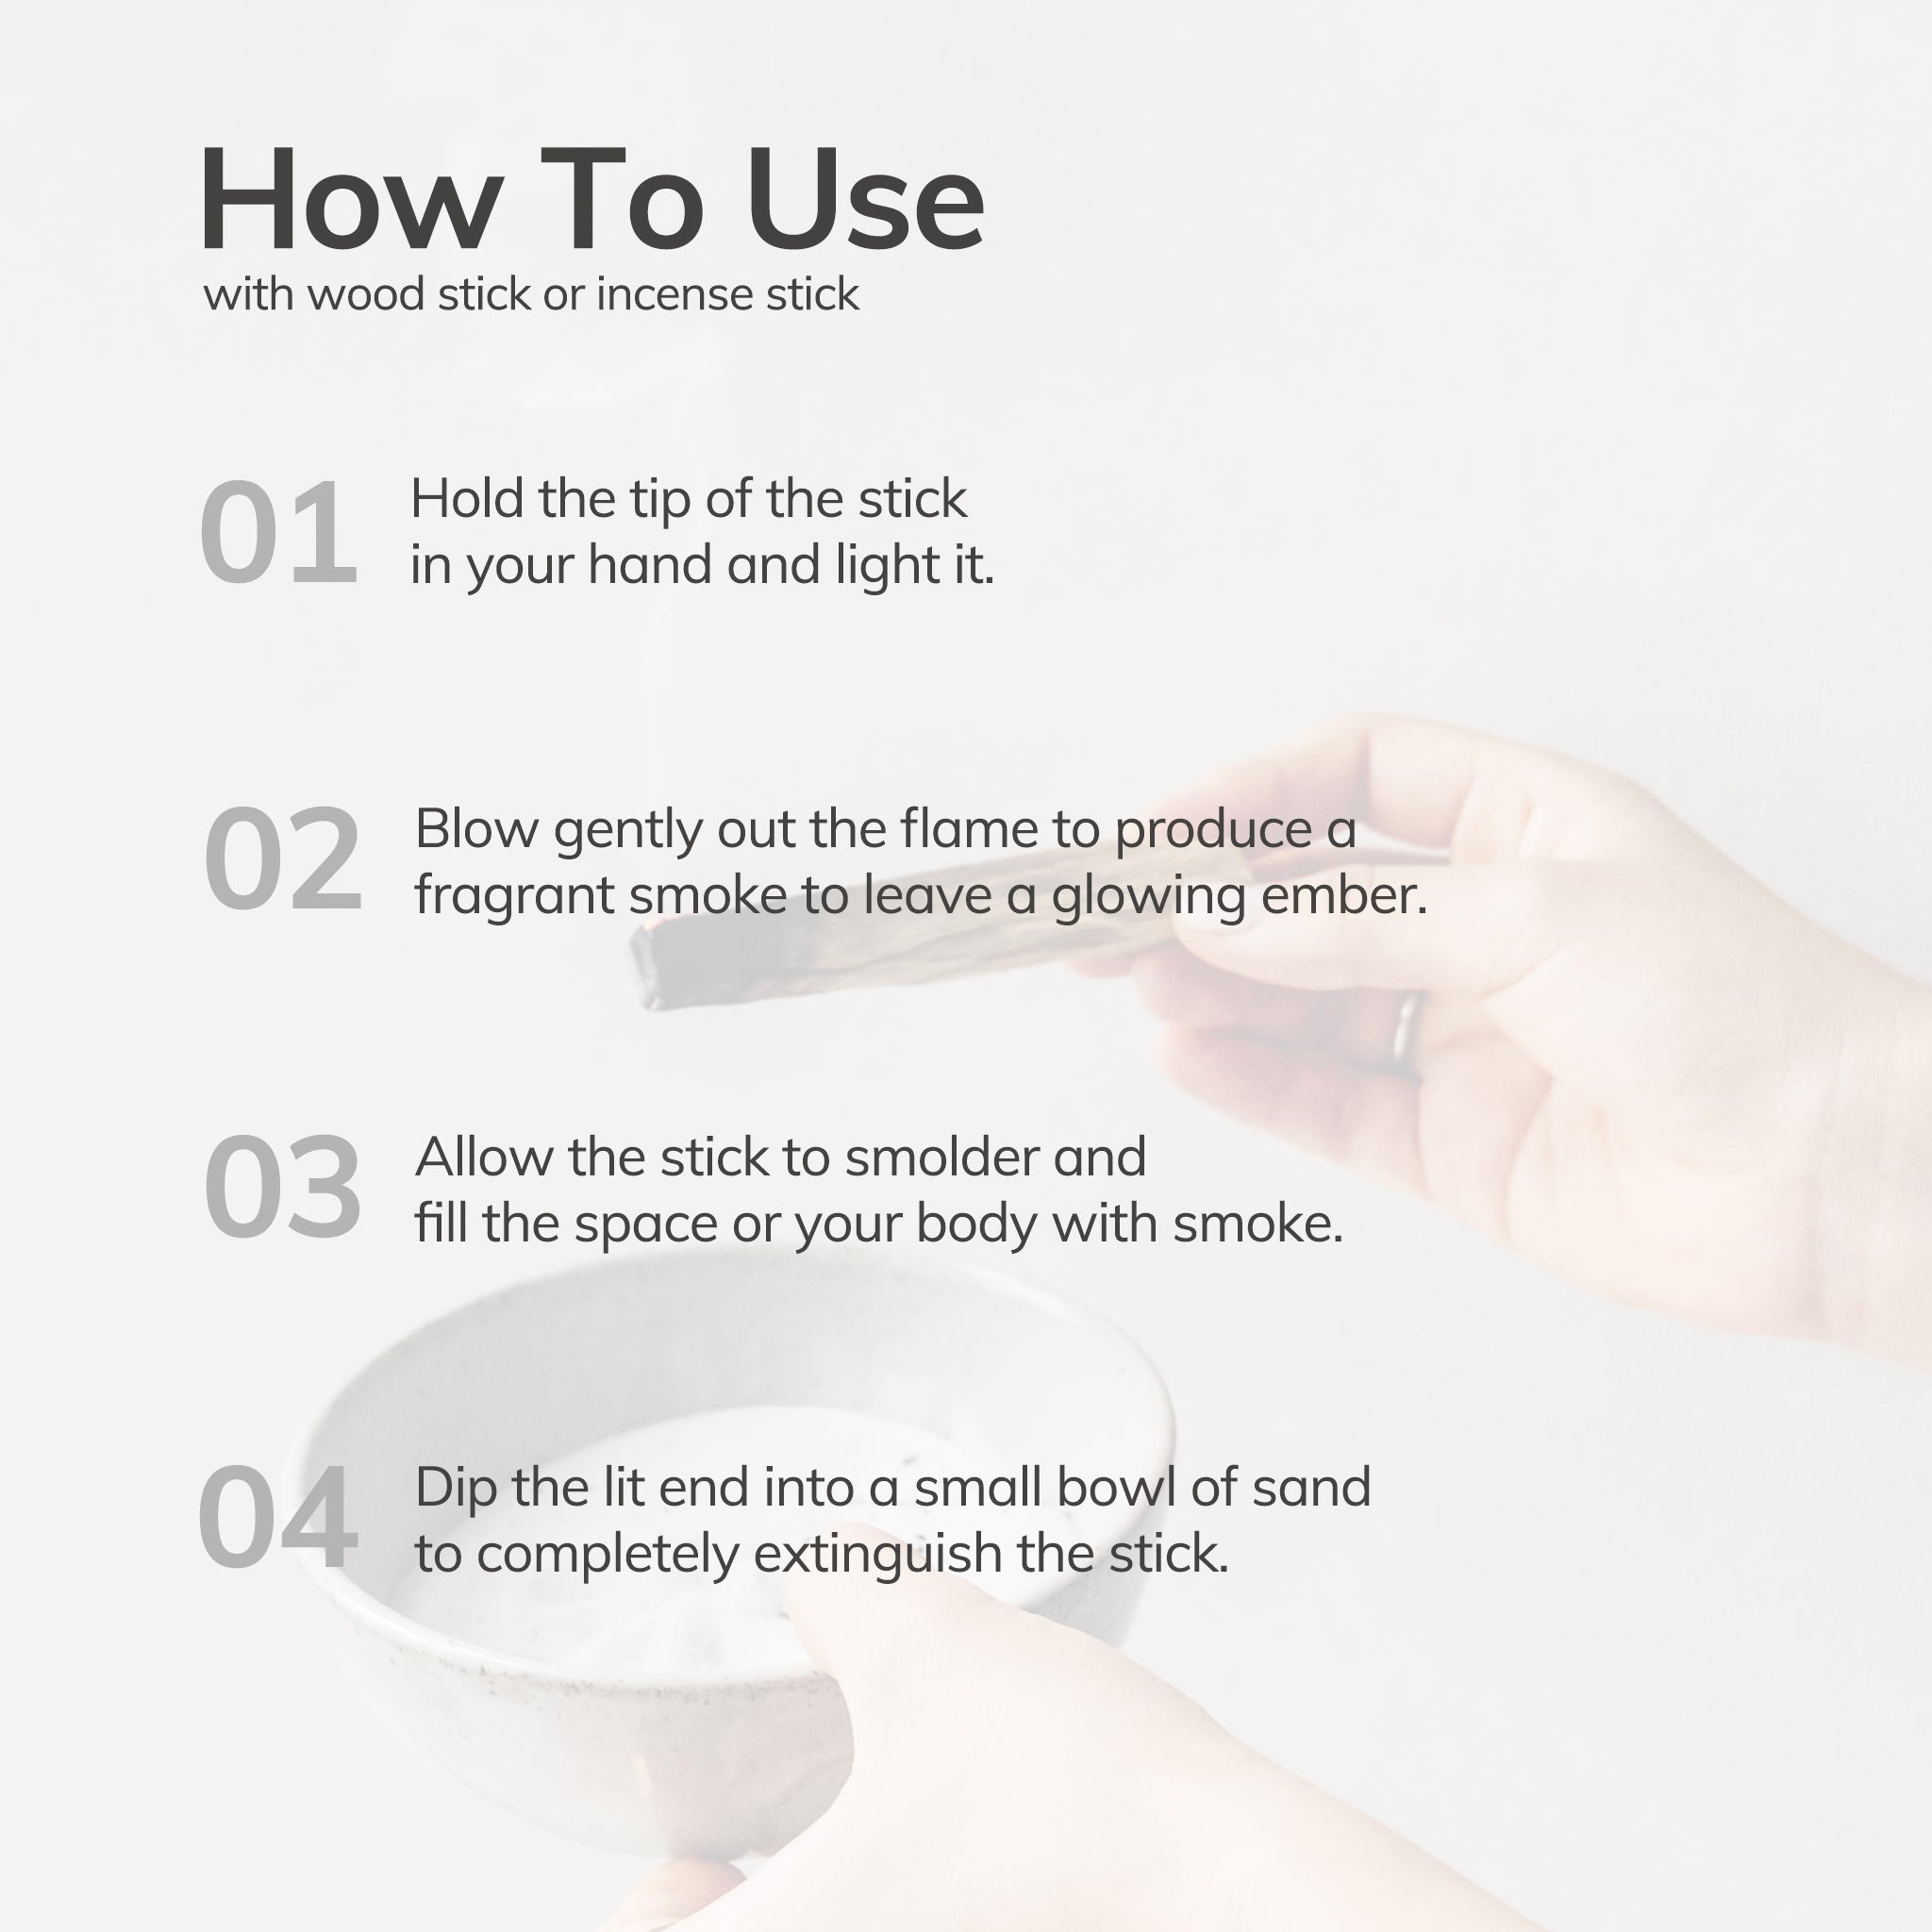 Chronological list of how to use incense stick.